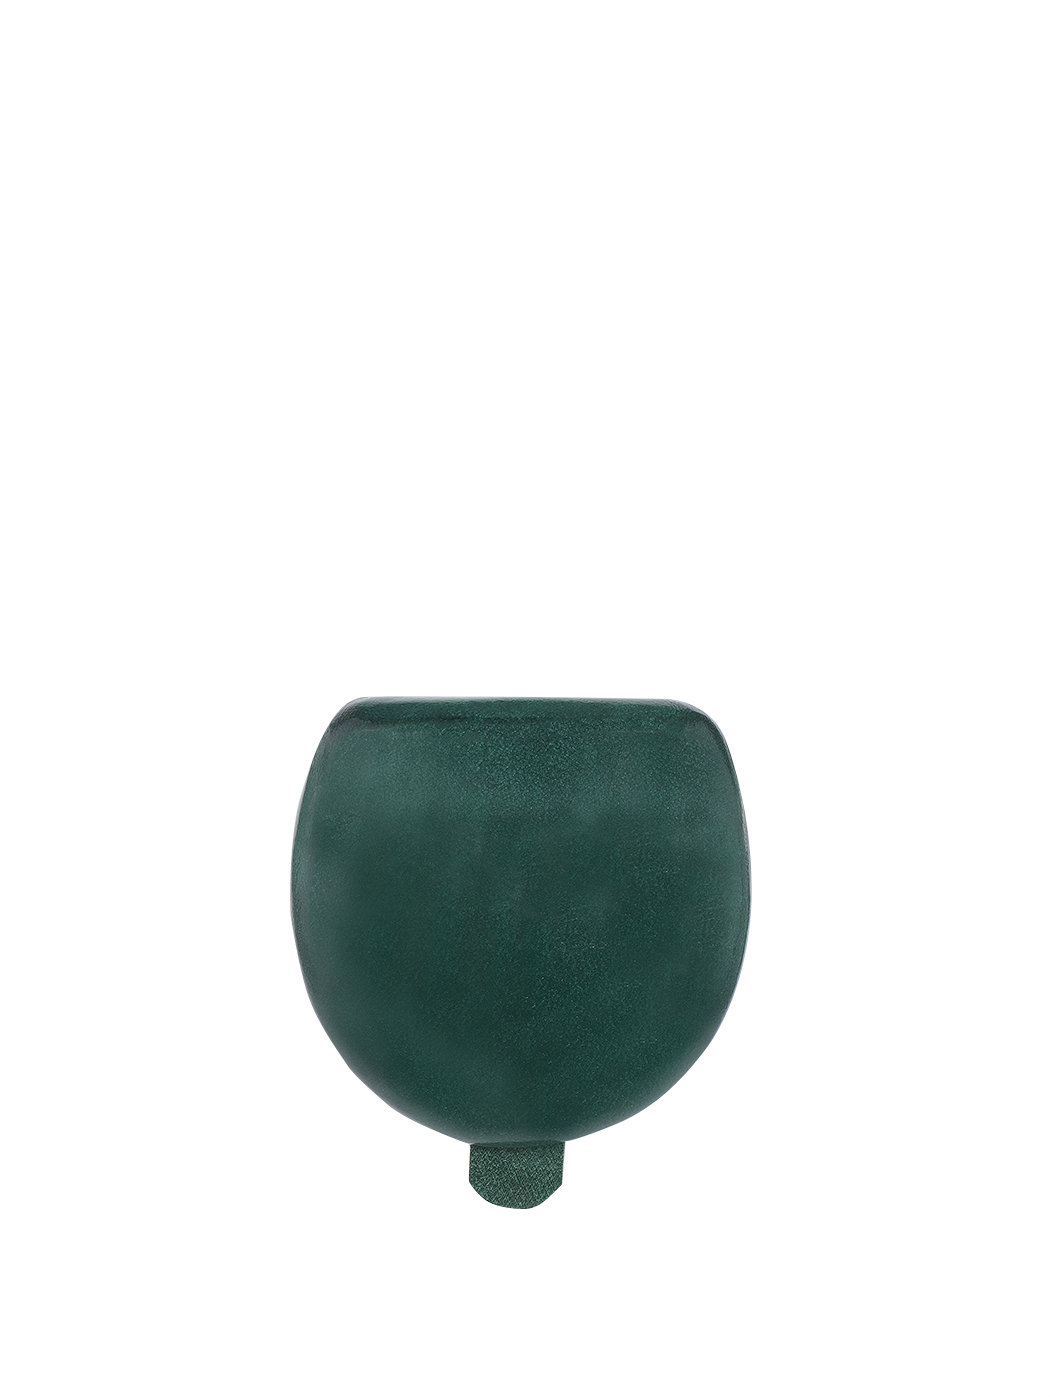 Florentine Tacco Leather Coin Holder Green